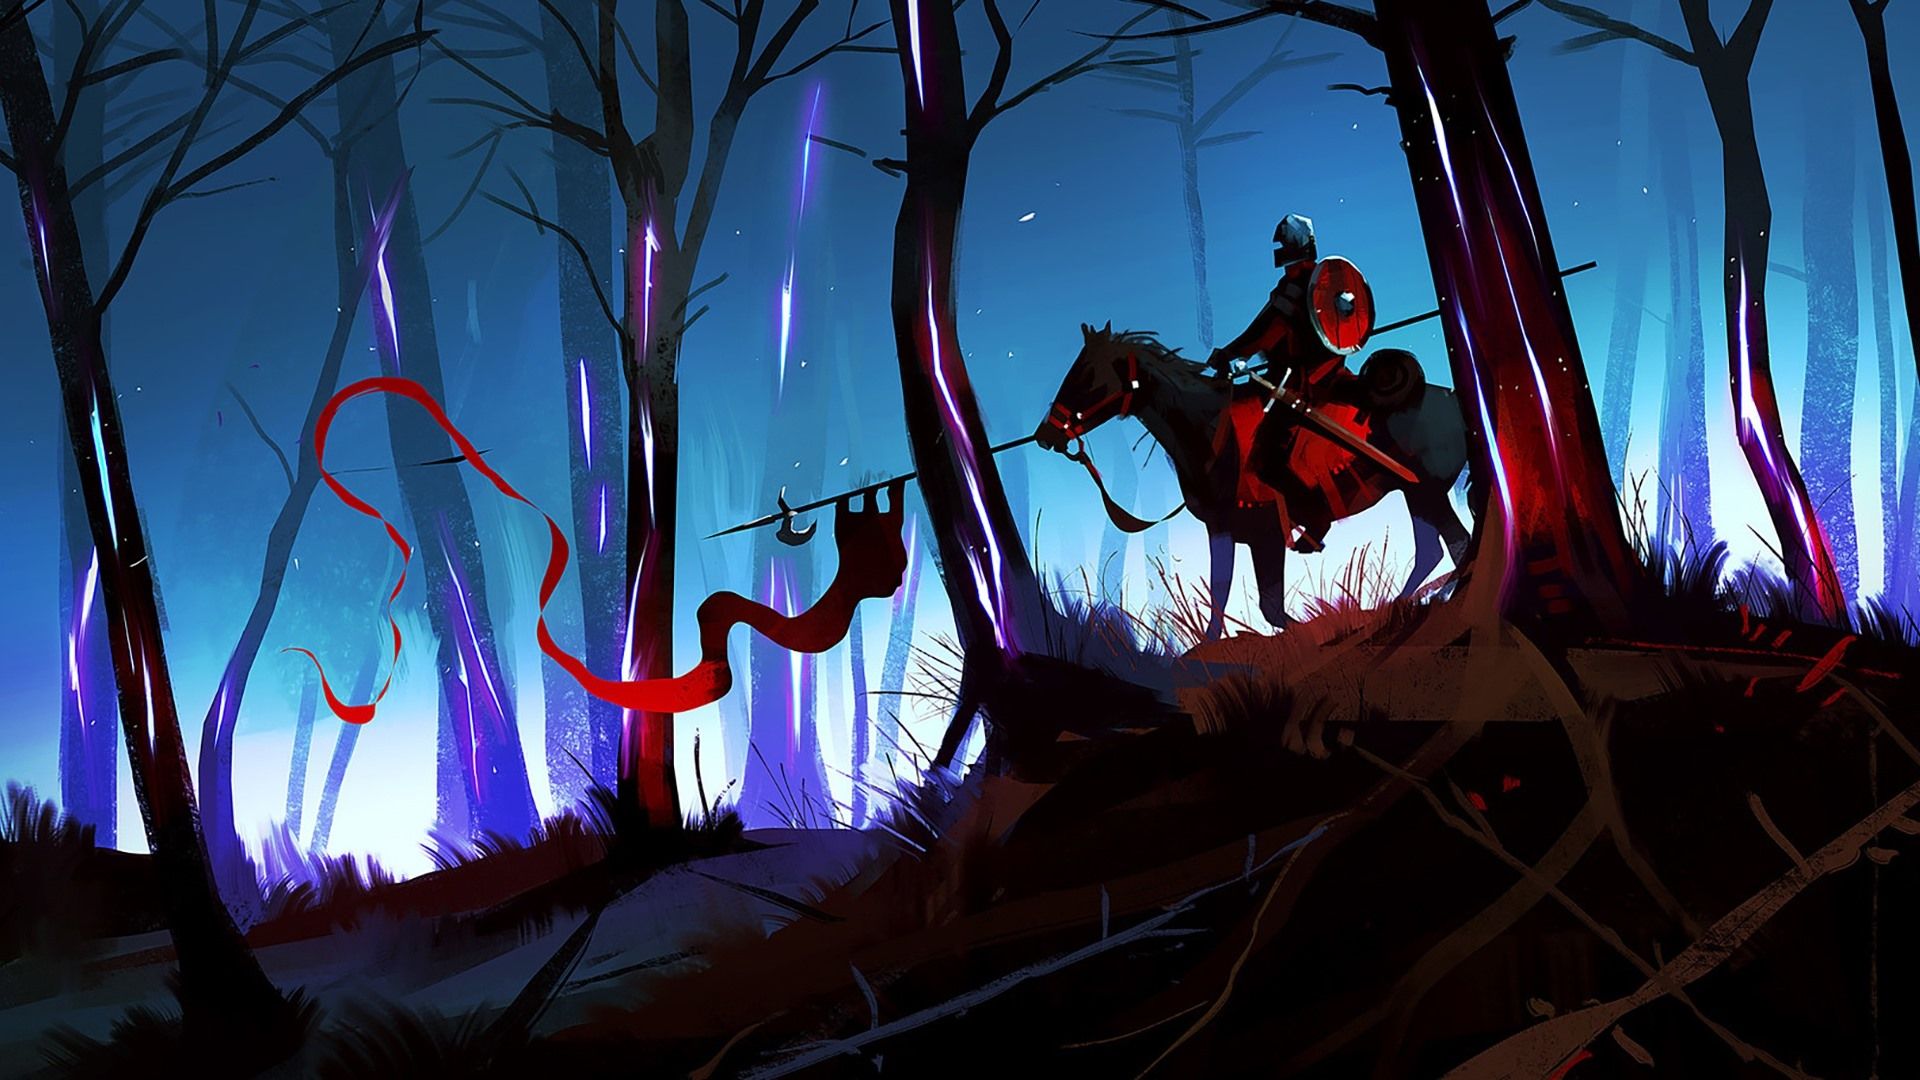 Wallpaper Art picture, forest, horse, warrior, rider 1920x1080 Full HD 2K Picture, Image